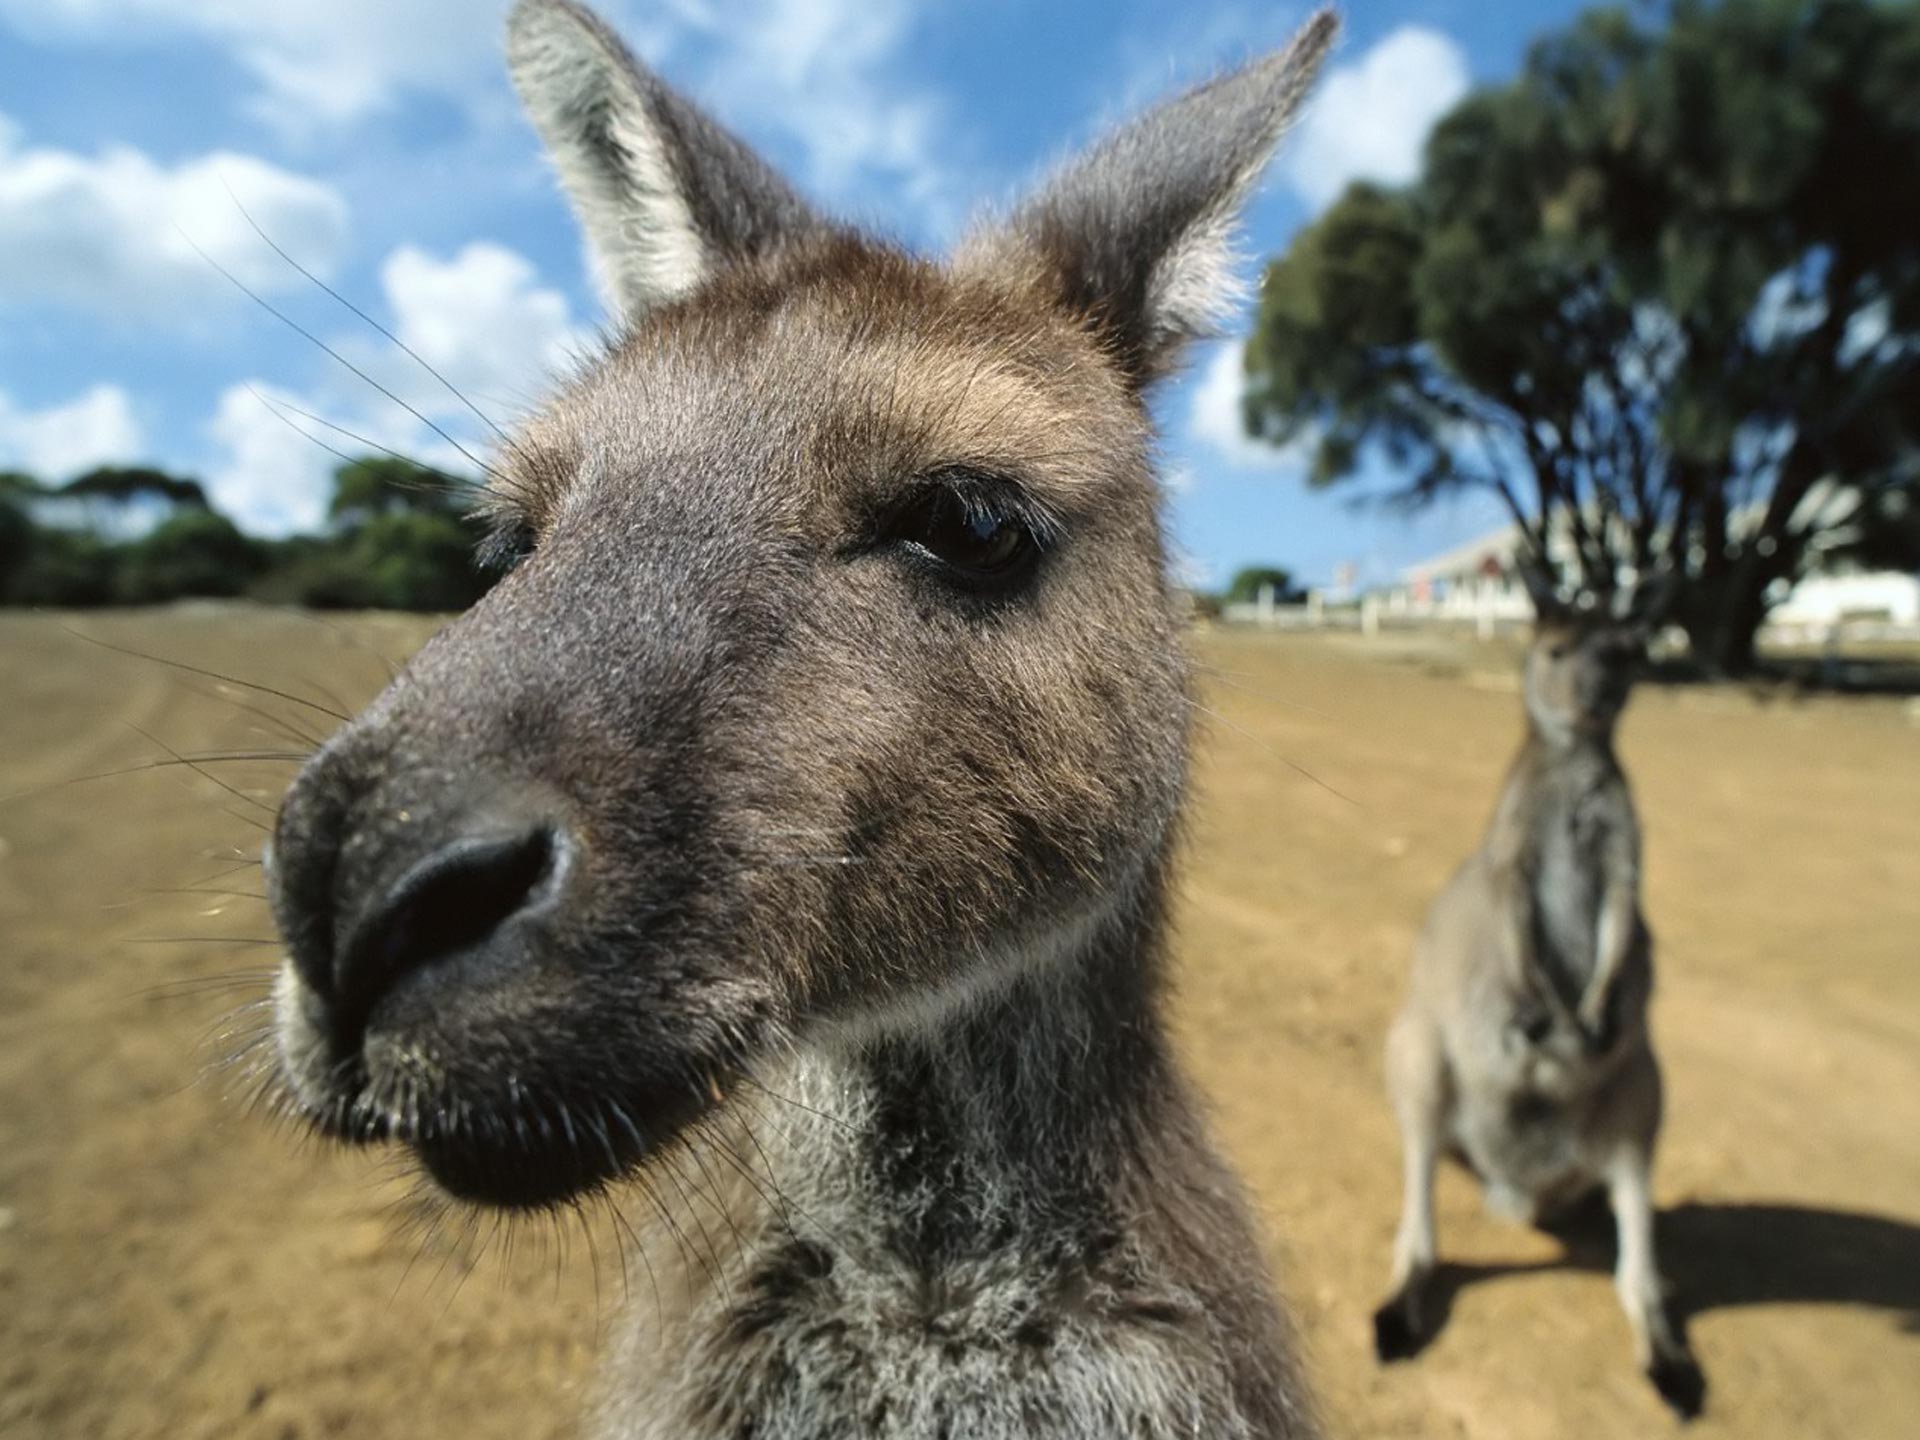 To set this Kangaroo-funny-face-wallpaper as wallpaper background on your Desktop, SmartPhone, Tablet, Laptop, iphone, ipad click above to open in a new ...